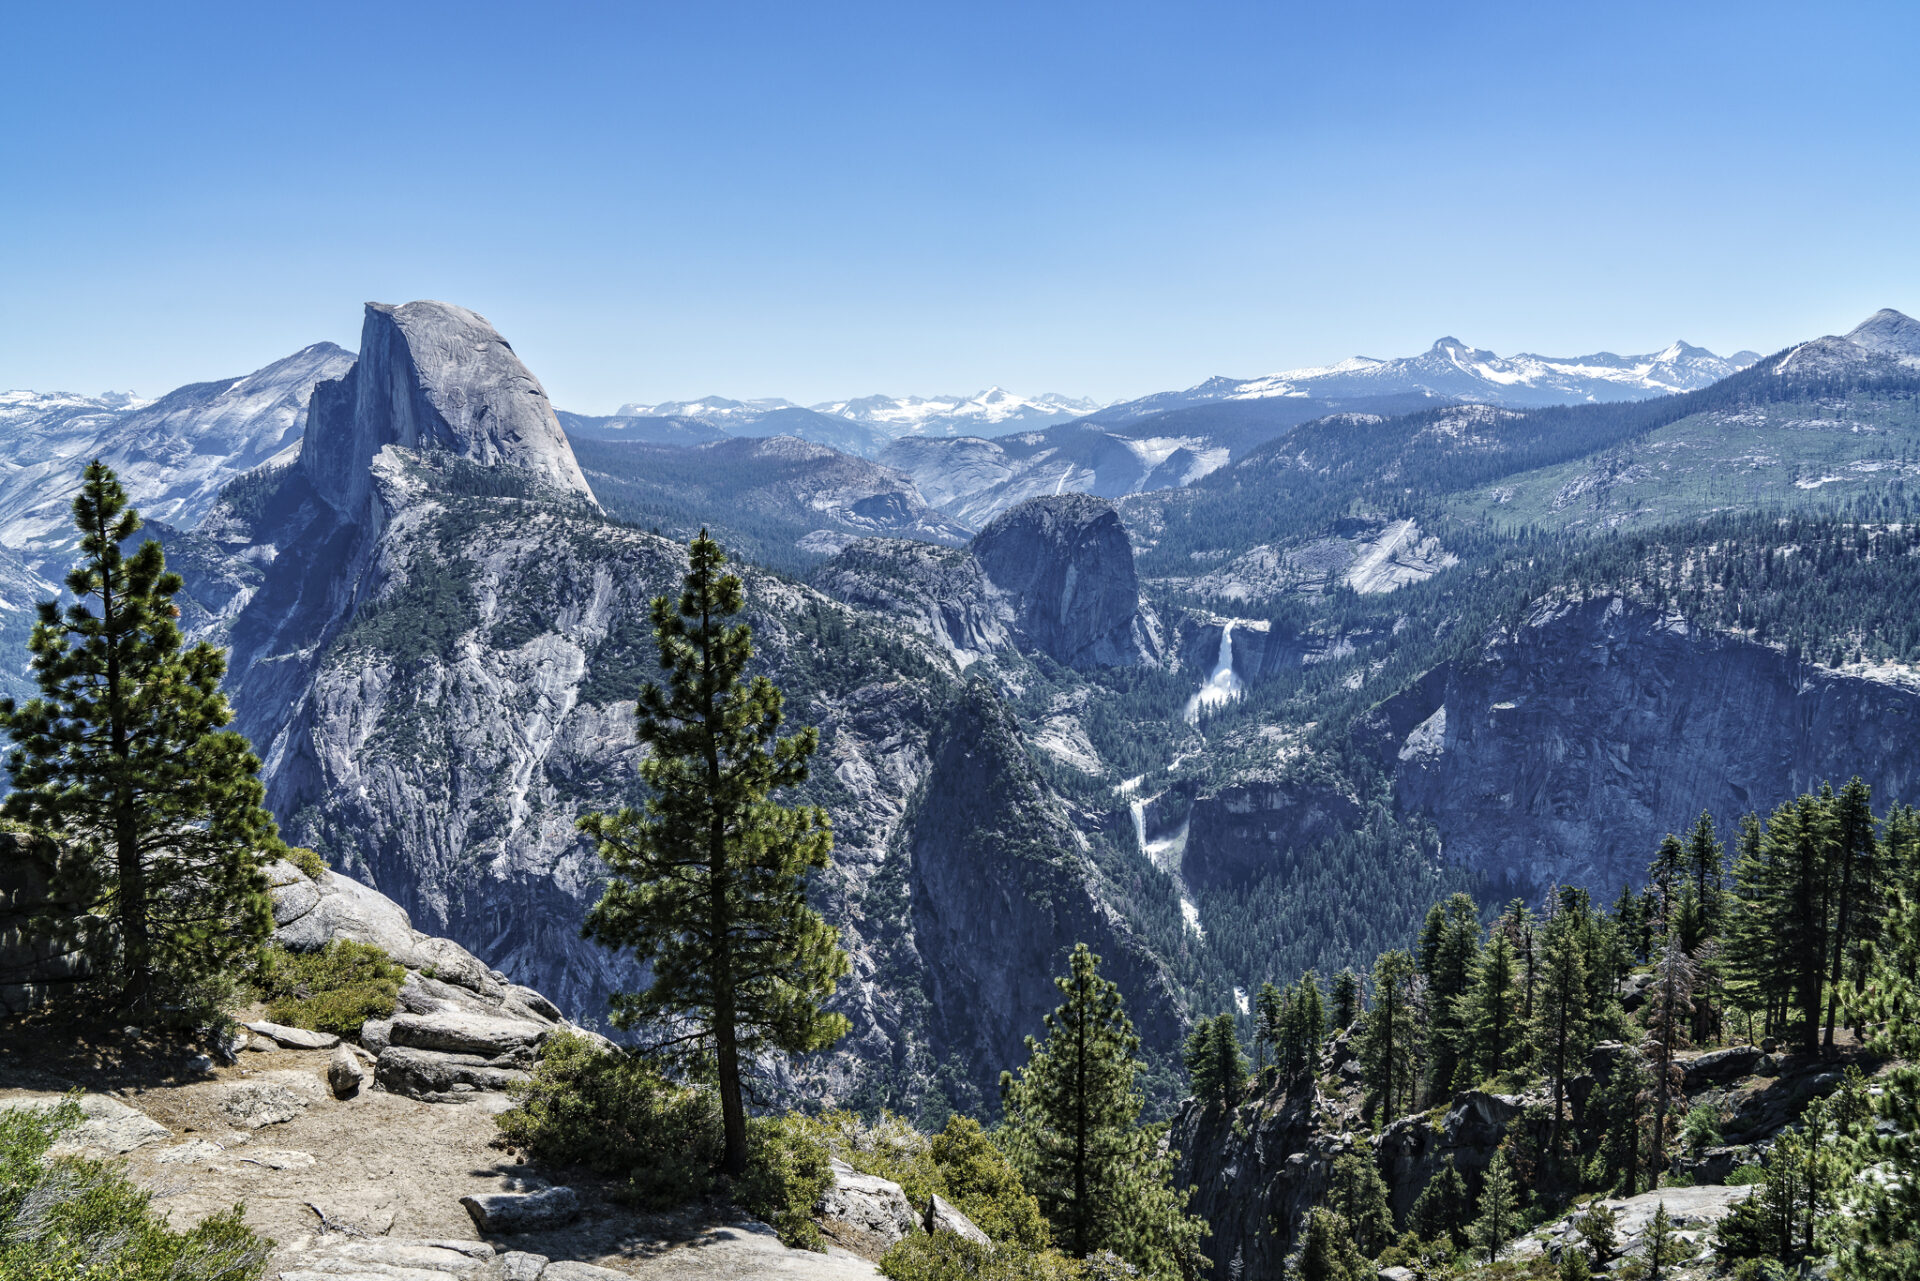 Half Dome from Glacier Point at Yosemite National Park